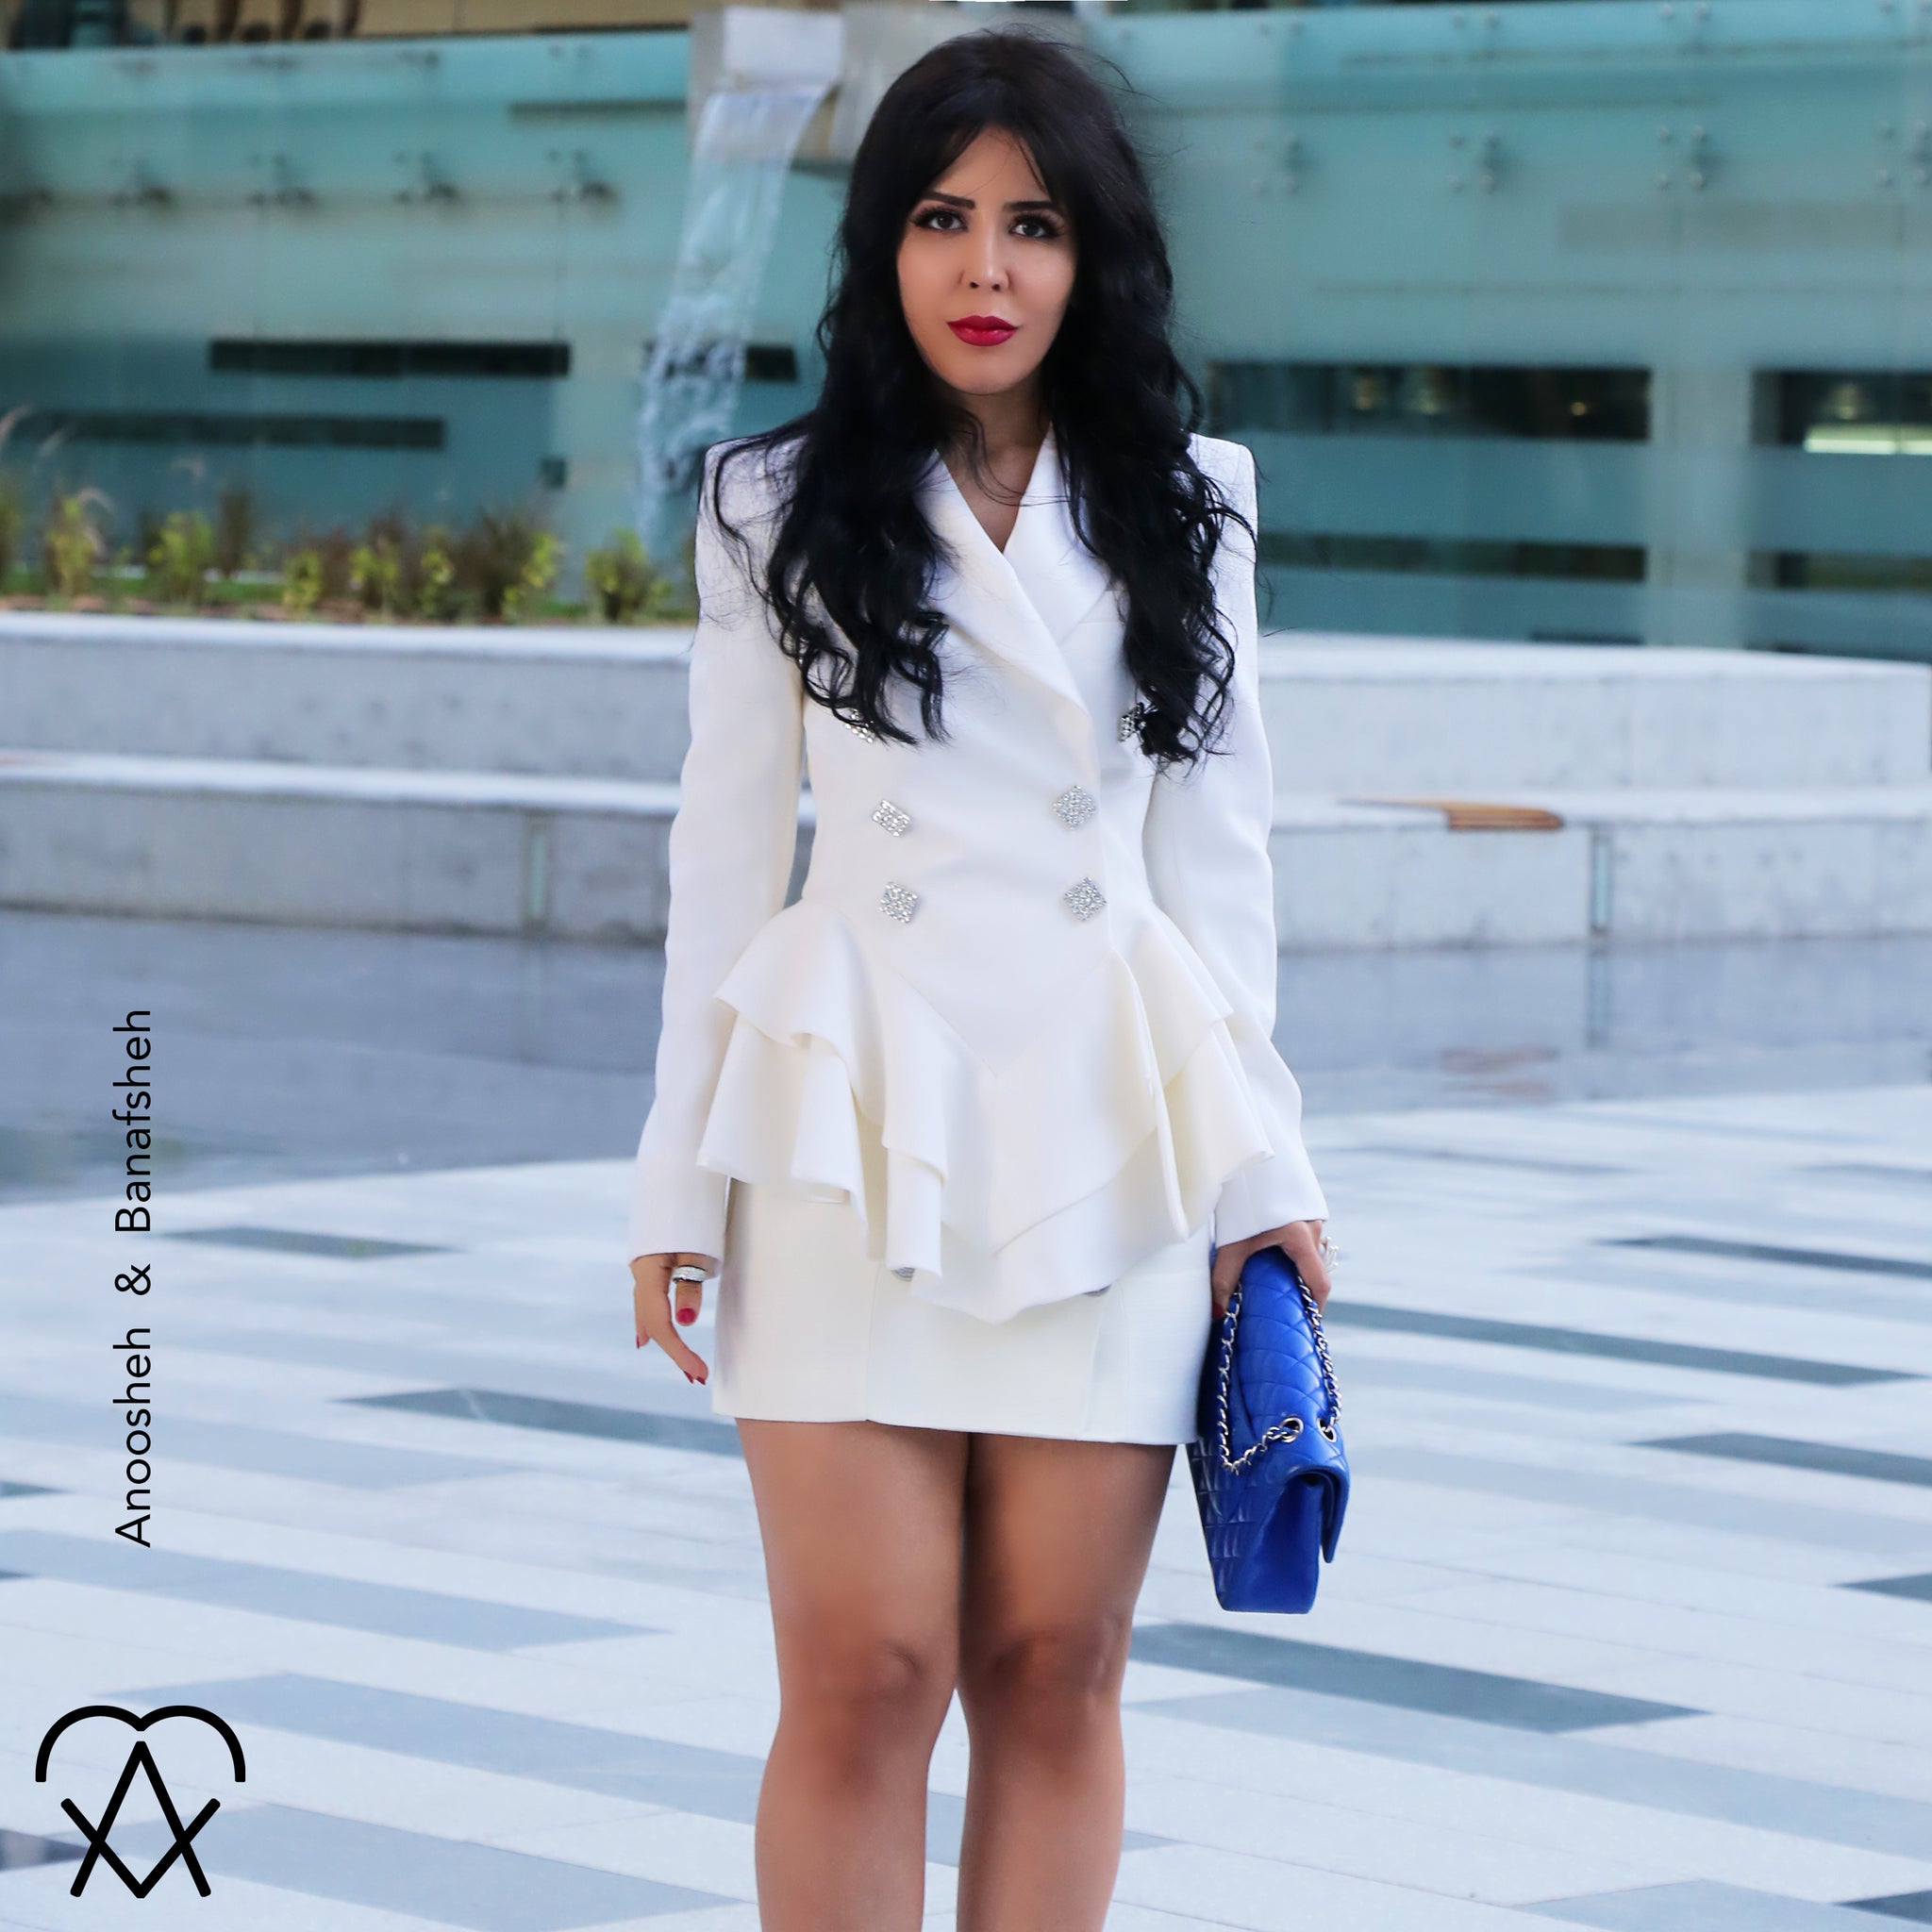 Anoosheh & Banafsheh Power of White in style and fashion wearing Alessandra Rich Jacket Balmain Skirt and Chanel Classic Flap Bag in Cobalt Blue